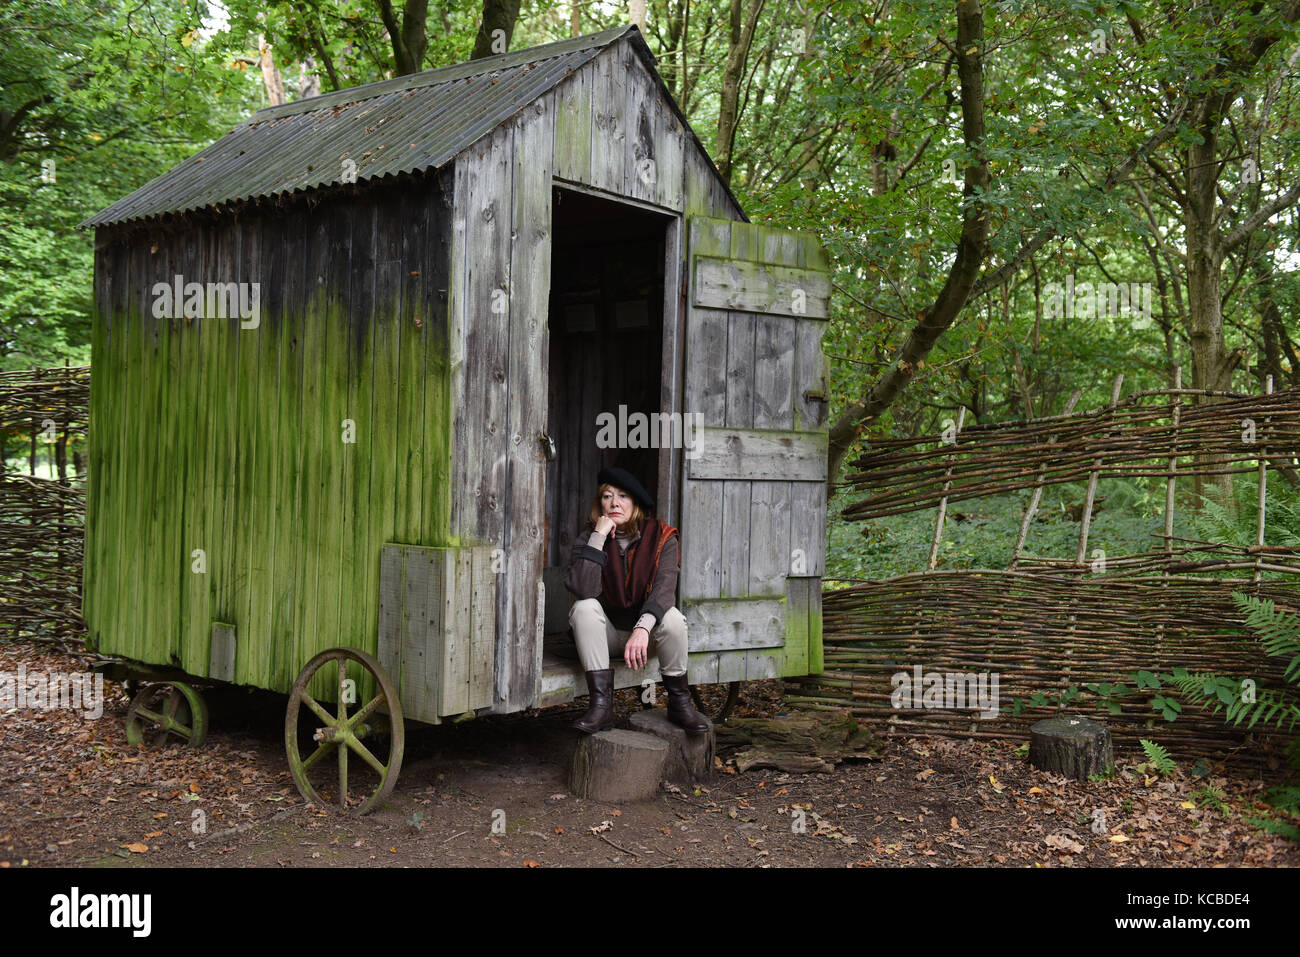 Woman relaxing at woodland garden shed on wheels Britain Uk secluded seclusion isolation hideaway rural retreat Stock Photo